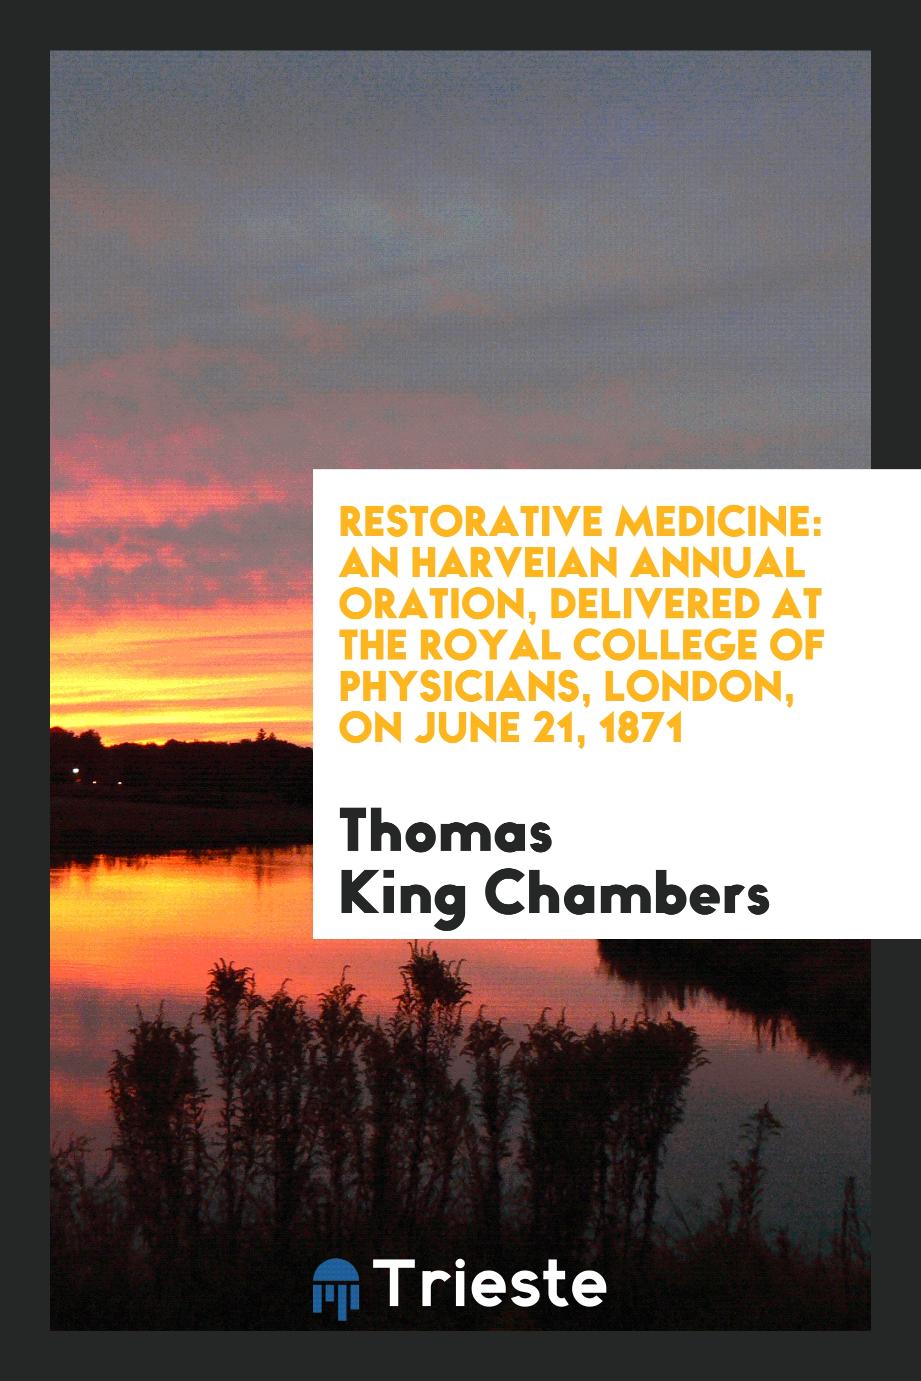 Restorative Medicine: An Harveian Annual Oration, Delivered at the Royal College of Physicians, London, on June 21, 1871